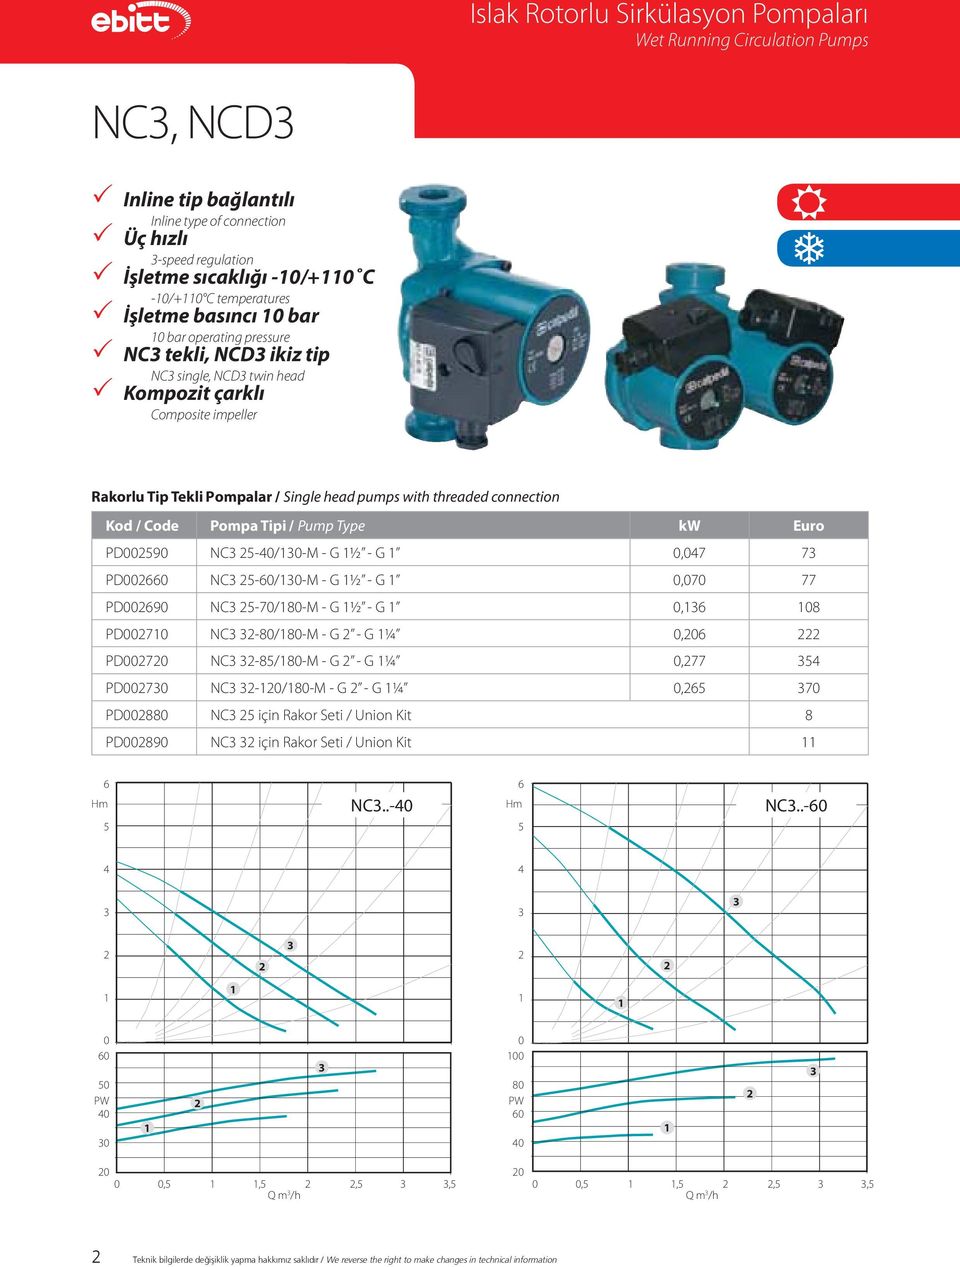 pumps with threaded connection Kod / Code Pompa Tipi / Pump Type kw Euro PD002590 NC3 25-40/130-M - G 1½ - G 1 0,047 73 PD002660 NC3 25-60/130-M - G 1½ - G 1 0,070 77 PD002690 NC3 25-70/180-M - G 1½